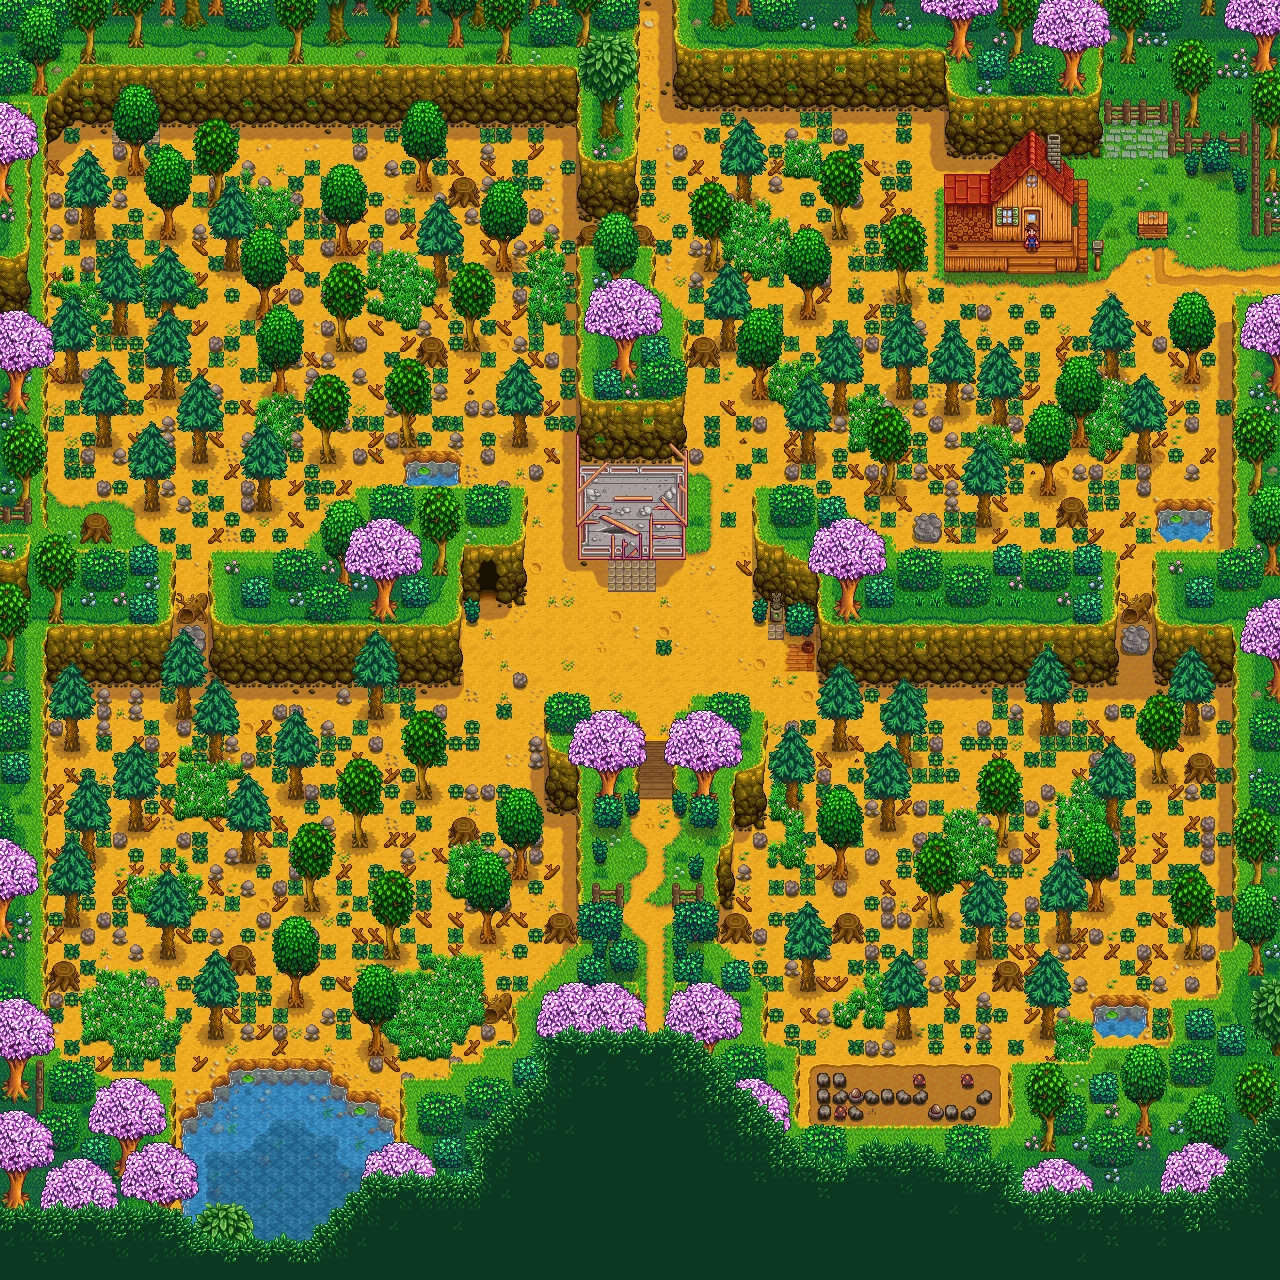 A Stardew Valley farm map with four distinct sections.